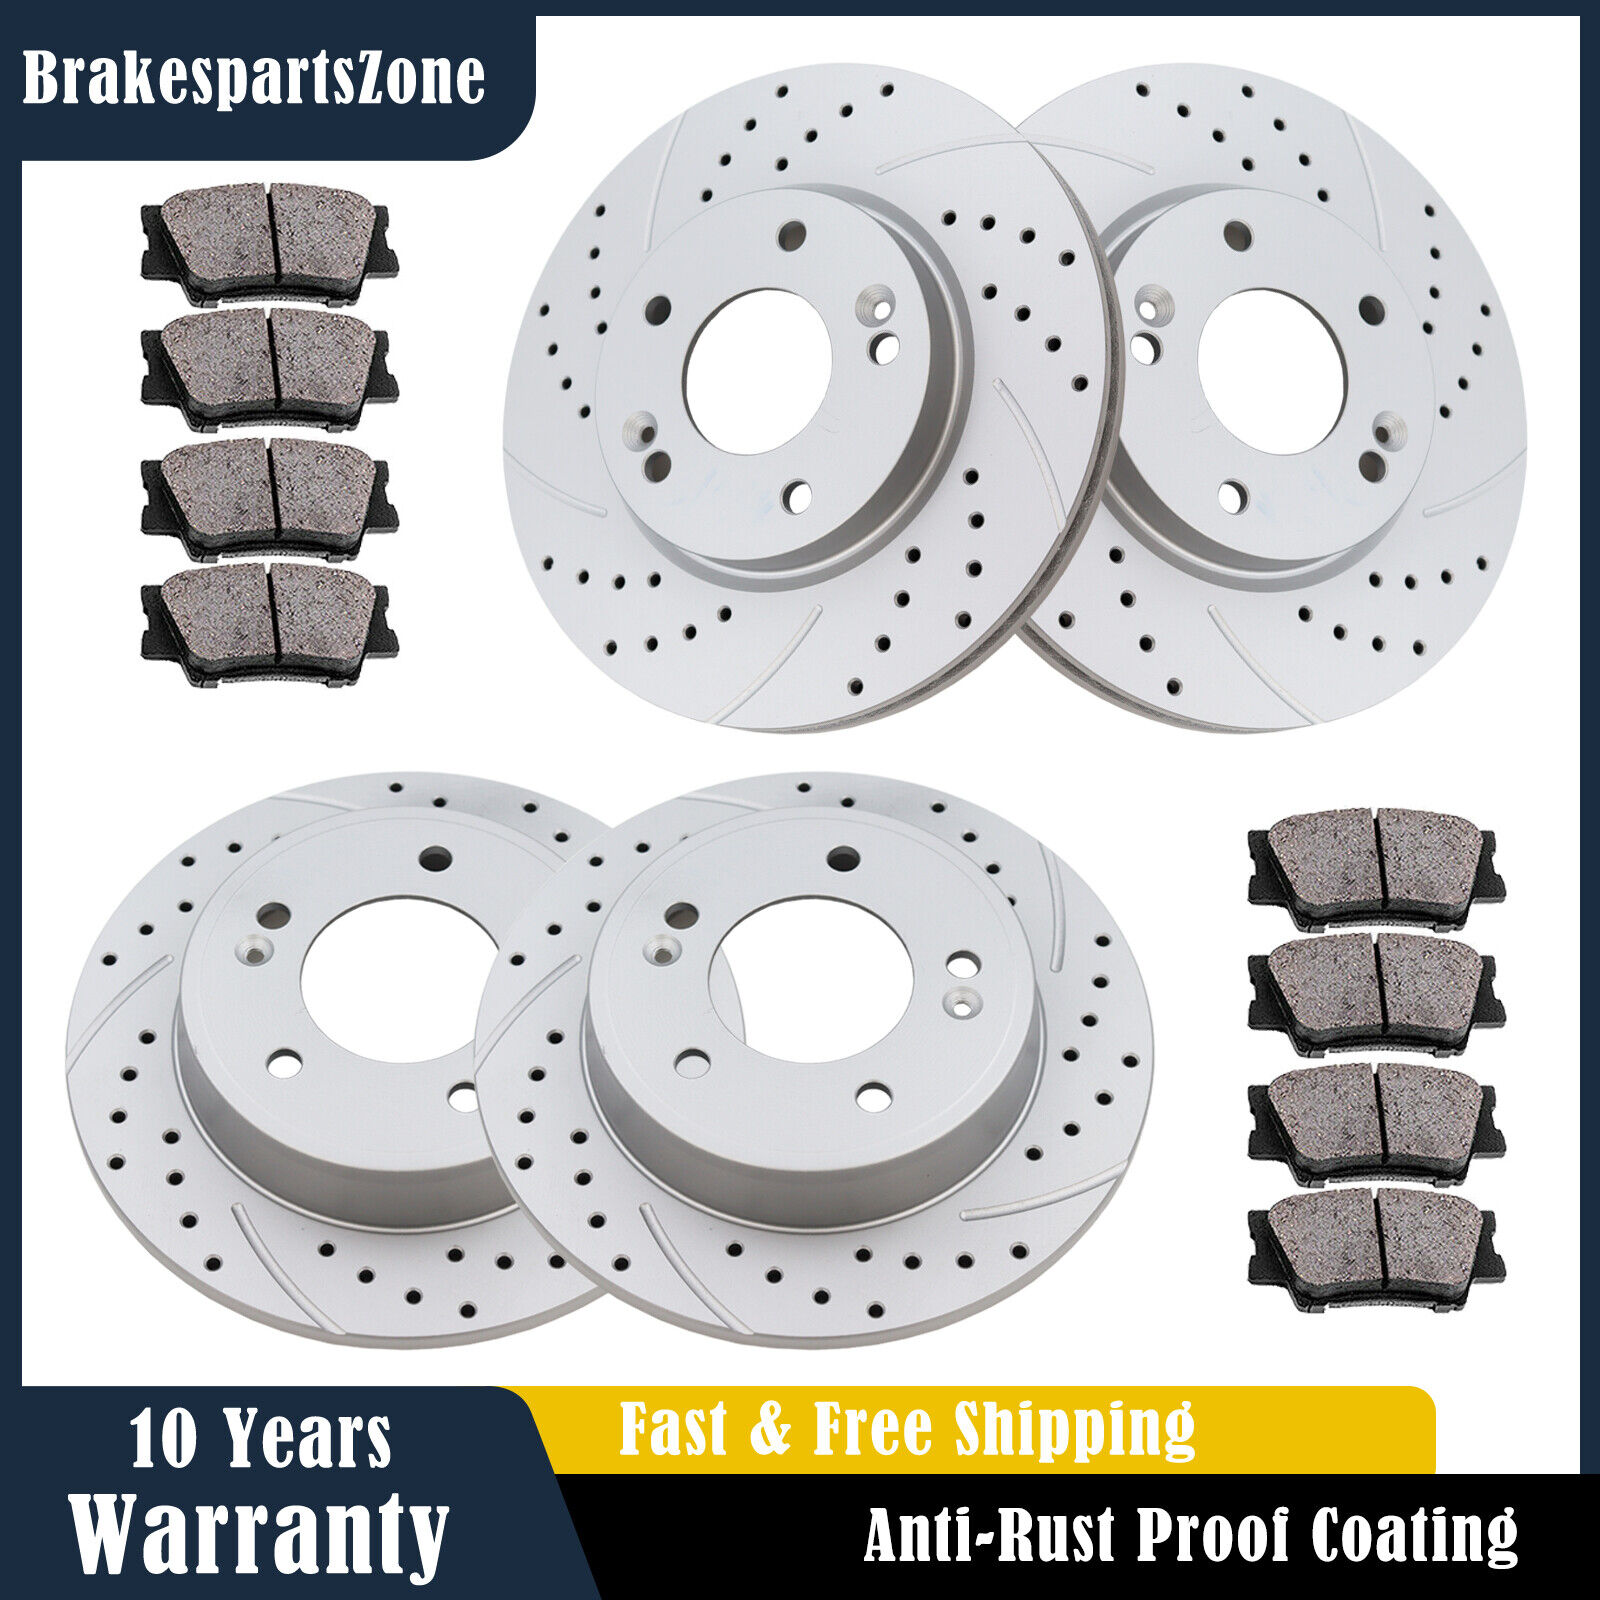 280mm Front and 262mm Rear Brake Rotors Pads fit for Hyundai Elantra Kia Forte